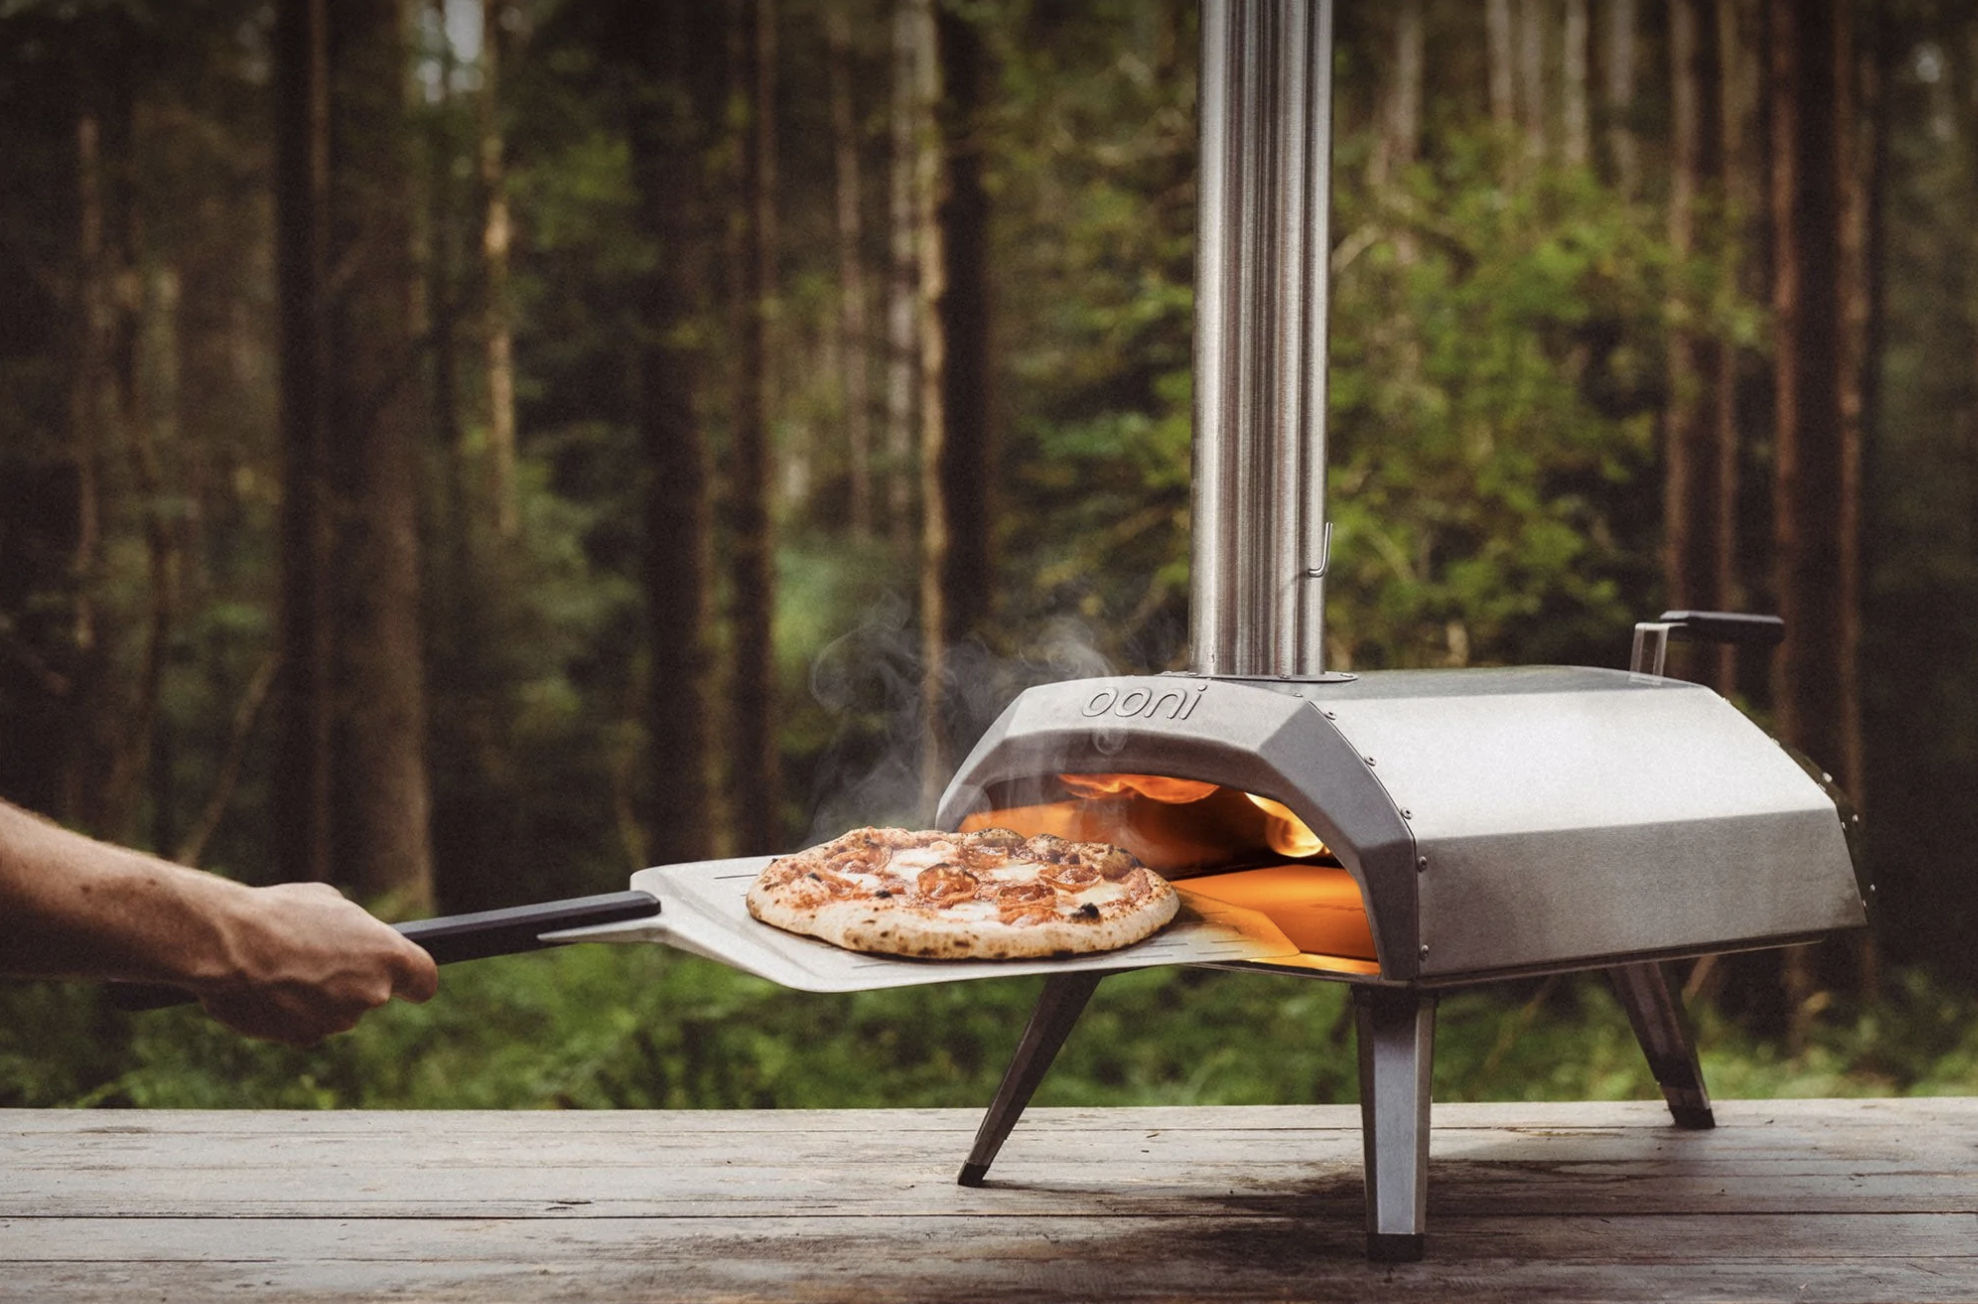 The metal pizza oven with a cooked pizza being pulled out of it